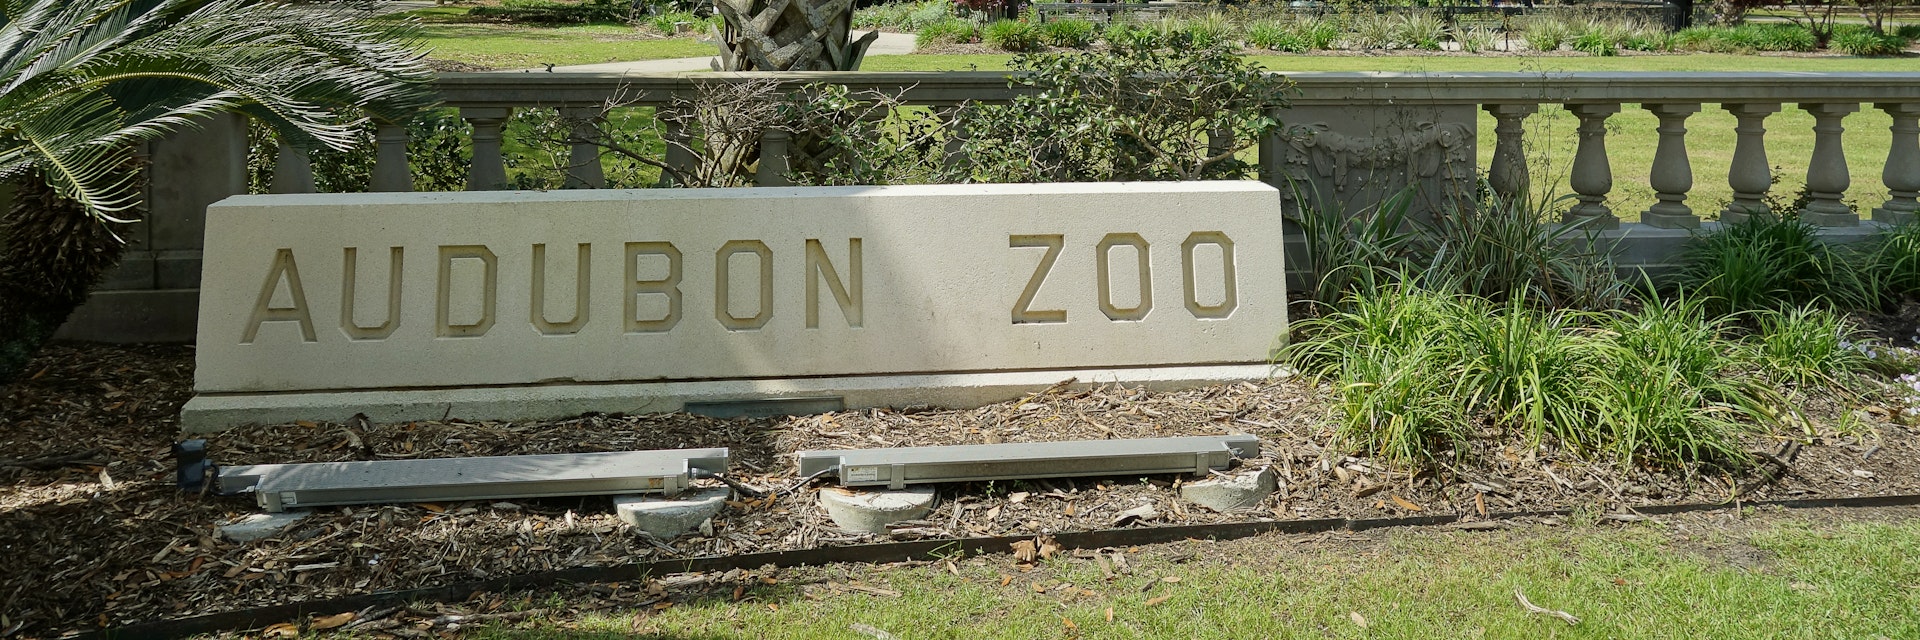 The entrance to Audubon Zoo in New Orleans.